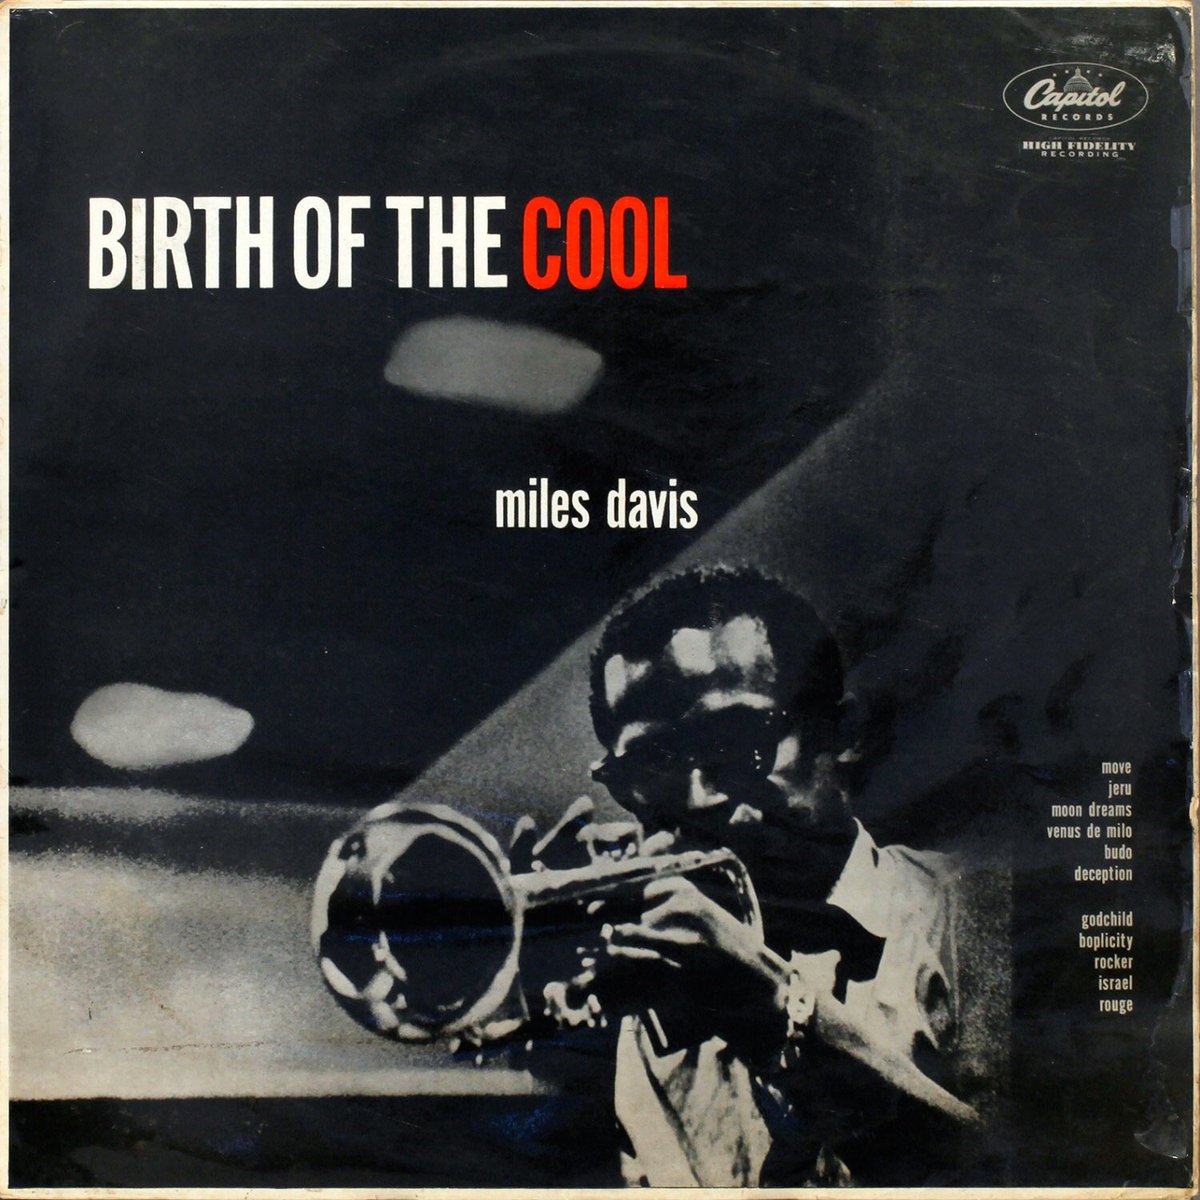 12. Miles Davis - Birth of the Cool (1958)Recorded: January 1949- March 1950Genre: Cool JazzRating: ★★★½Note: Liked this more than his other albums. Definitely less ambitious, but that's what makes it comforting. I think his other stuff will grow on me, though!